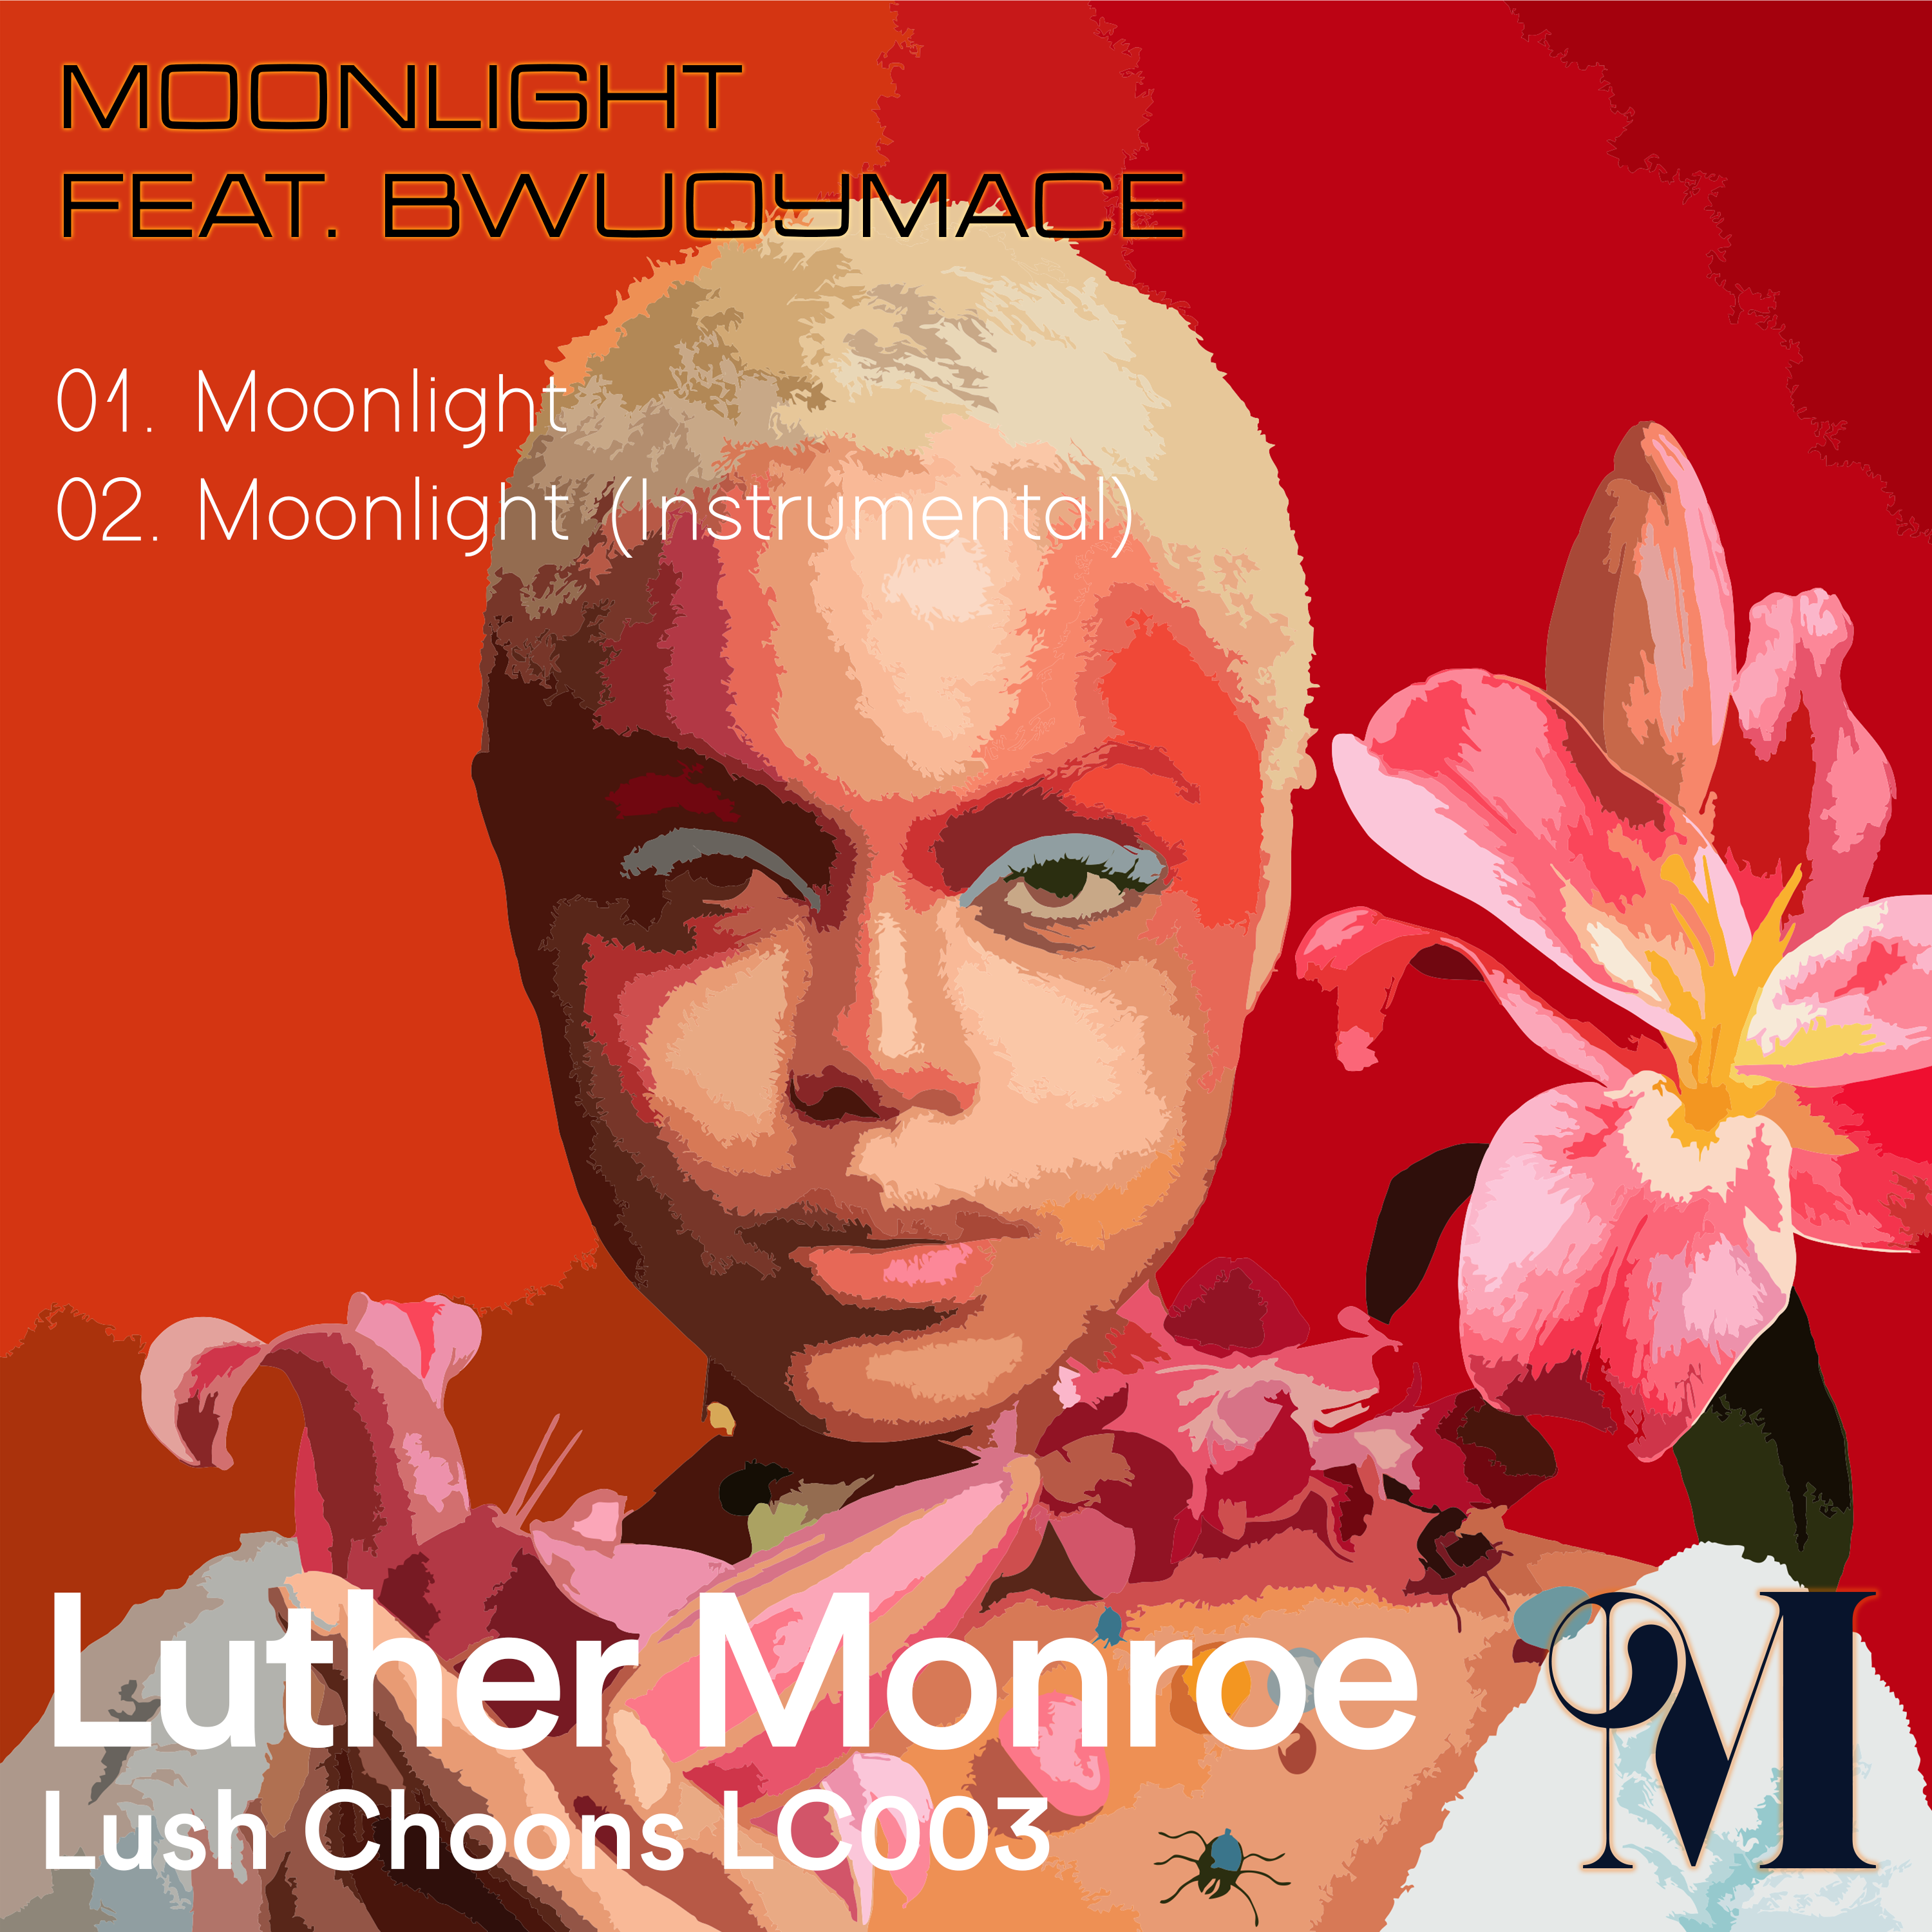 Bringing his incredible Afrobeat sound to Africa, ‘Luther Monroe’ joins with talented Nigerian vocalist ‘BwuoyMace’ on new single ‘Moonlight’.